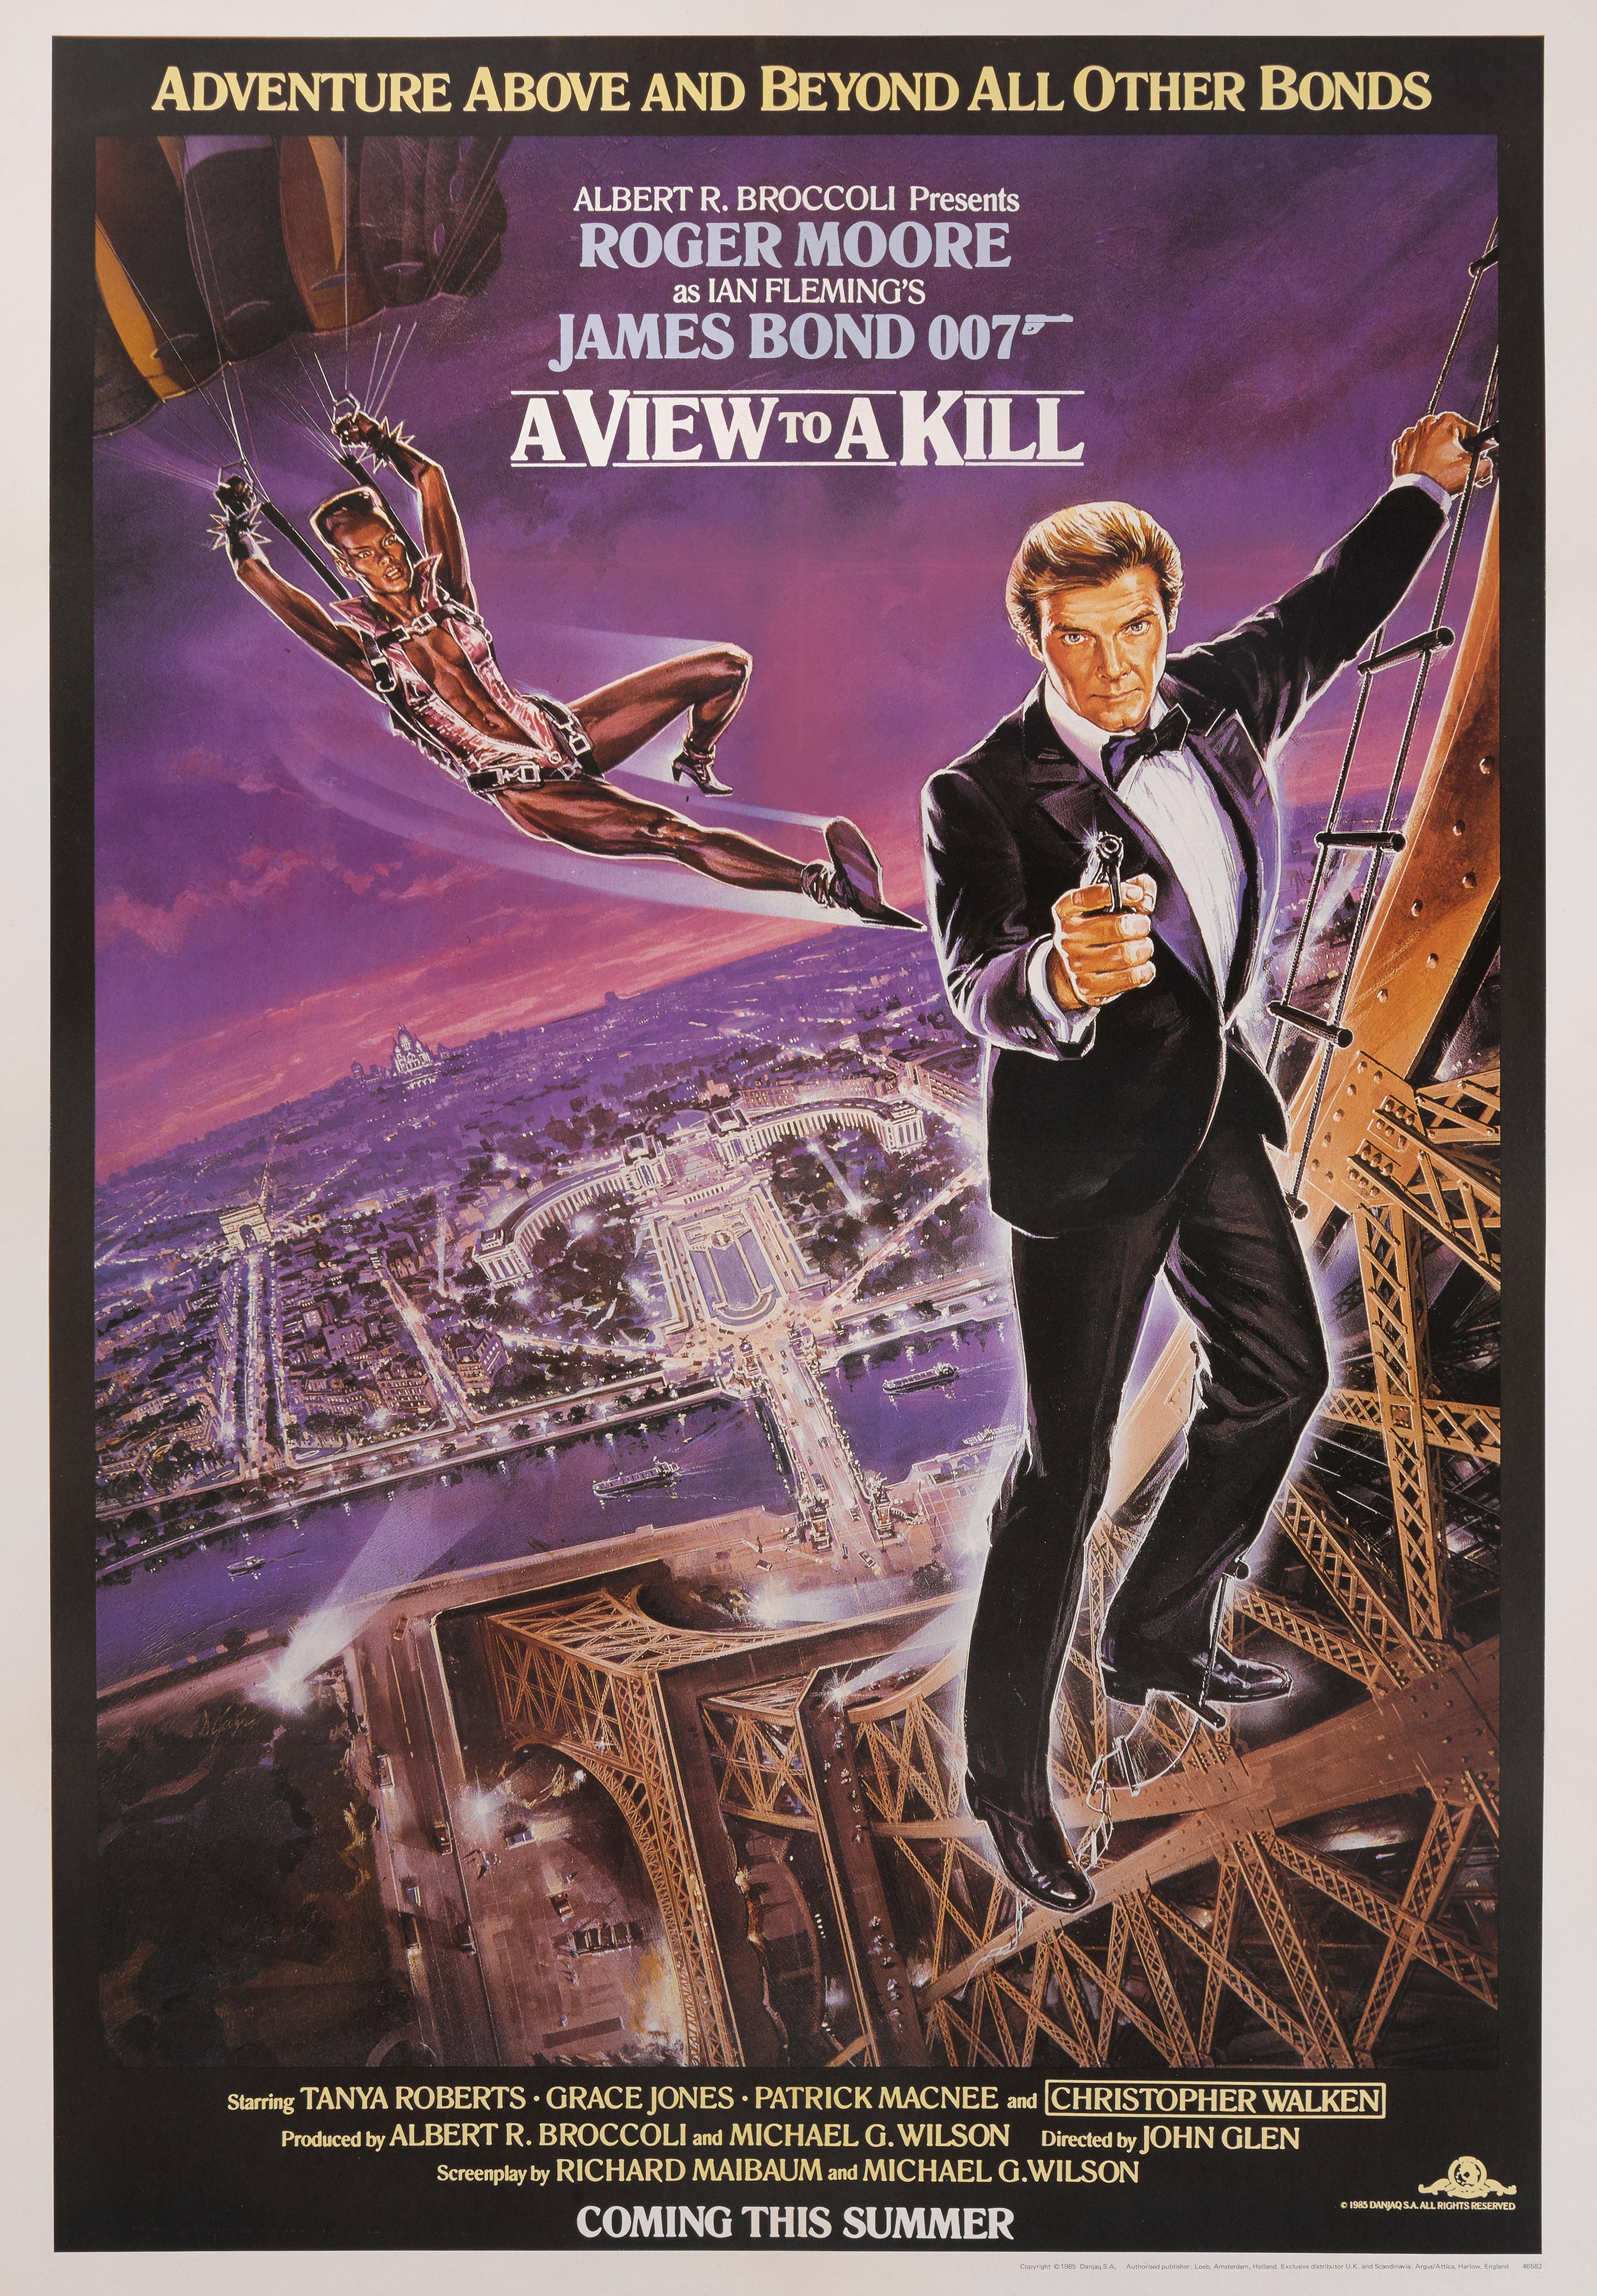 Original US Advance purple style film poster for Roger Moore andGrace Jones 1985 Bond film.
This film was directed by John Glen.
This poster is conservation linen backed It would be shipped rolled in a strong tube and shipped by Federal Express.